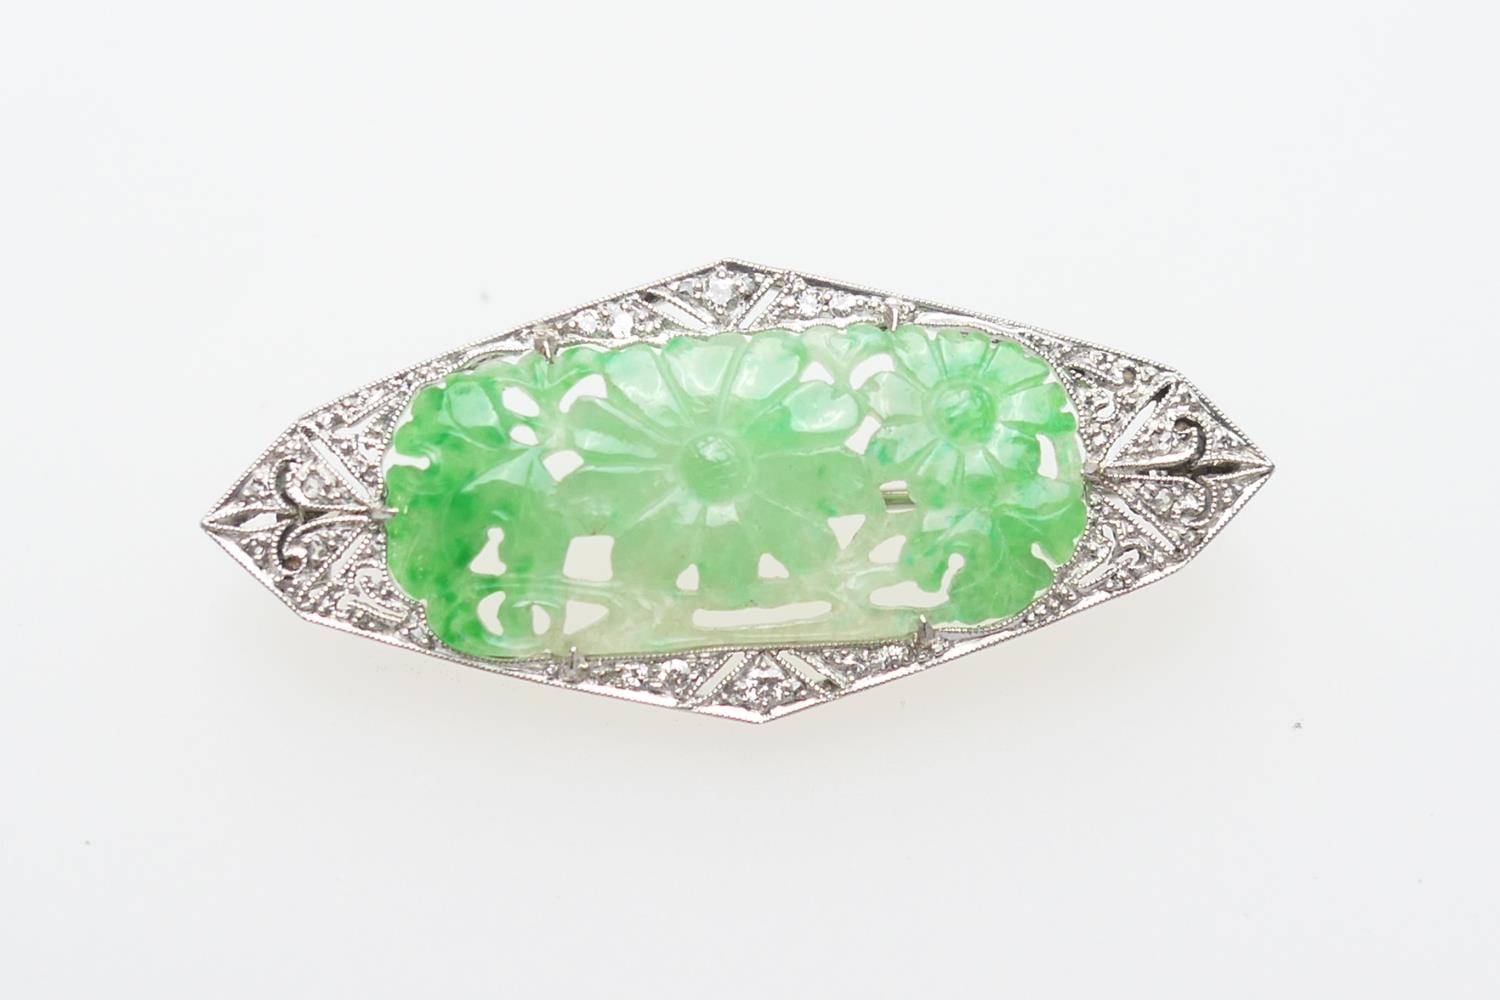 Art Deco carved jade and diamond brooch in 18ct gold and platinum, lozenge shape centred with a jade - Image 2 of 8